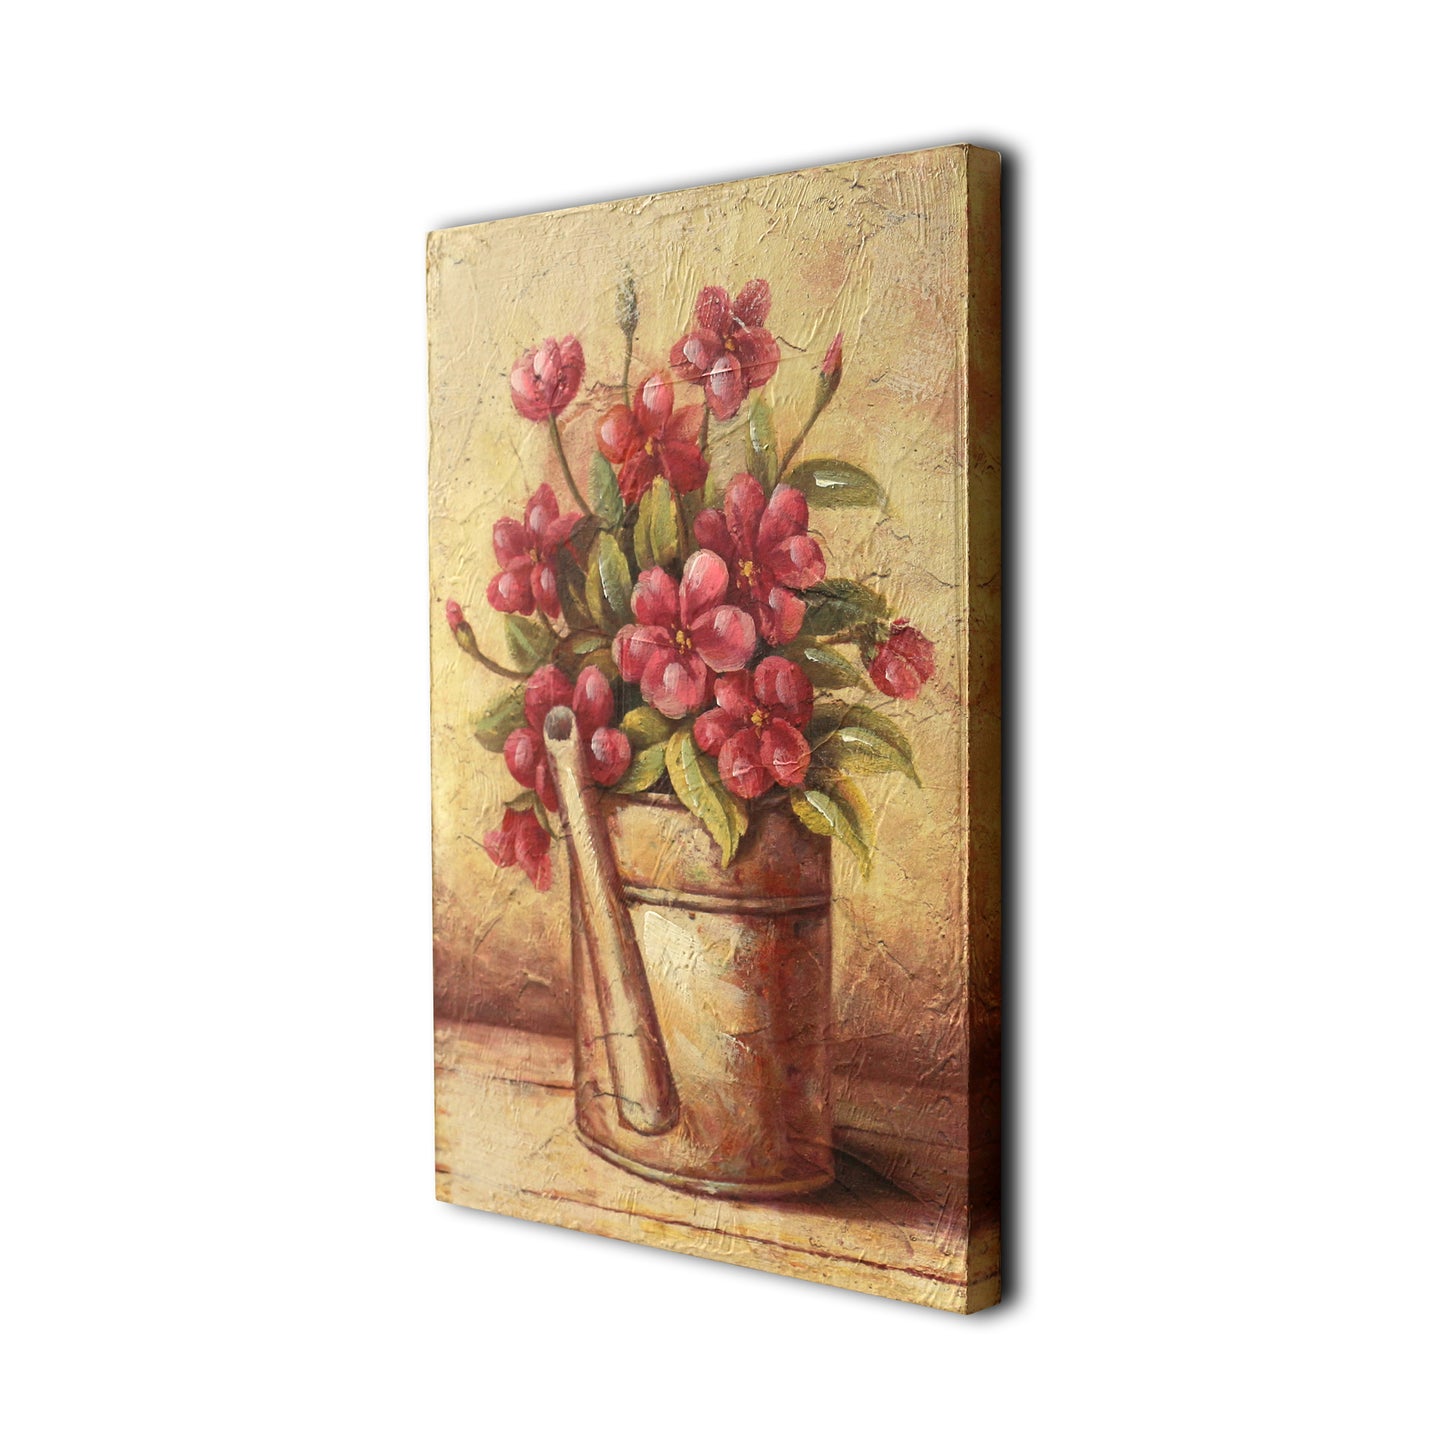 CVHOMEDECO. Country Vintage Hand Painted Wooden Frame Wall Hanging 3D Painting Landscape Art Décor, Flower in Pail Design, 8 x 12 Inch